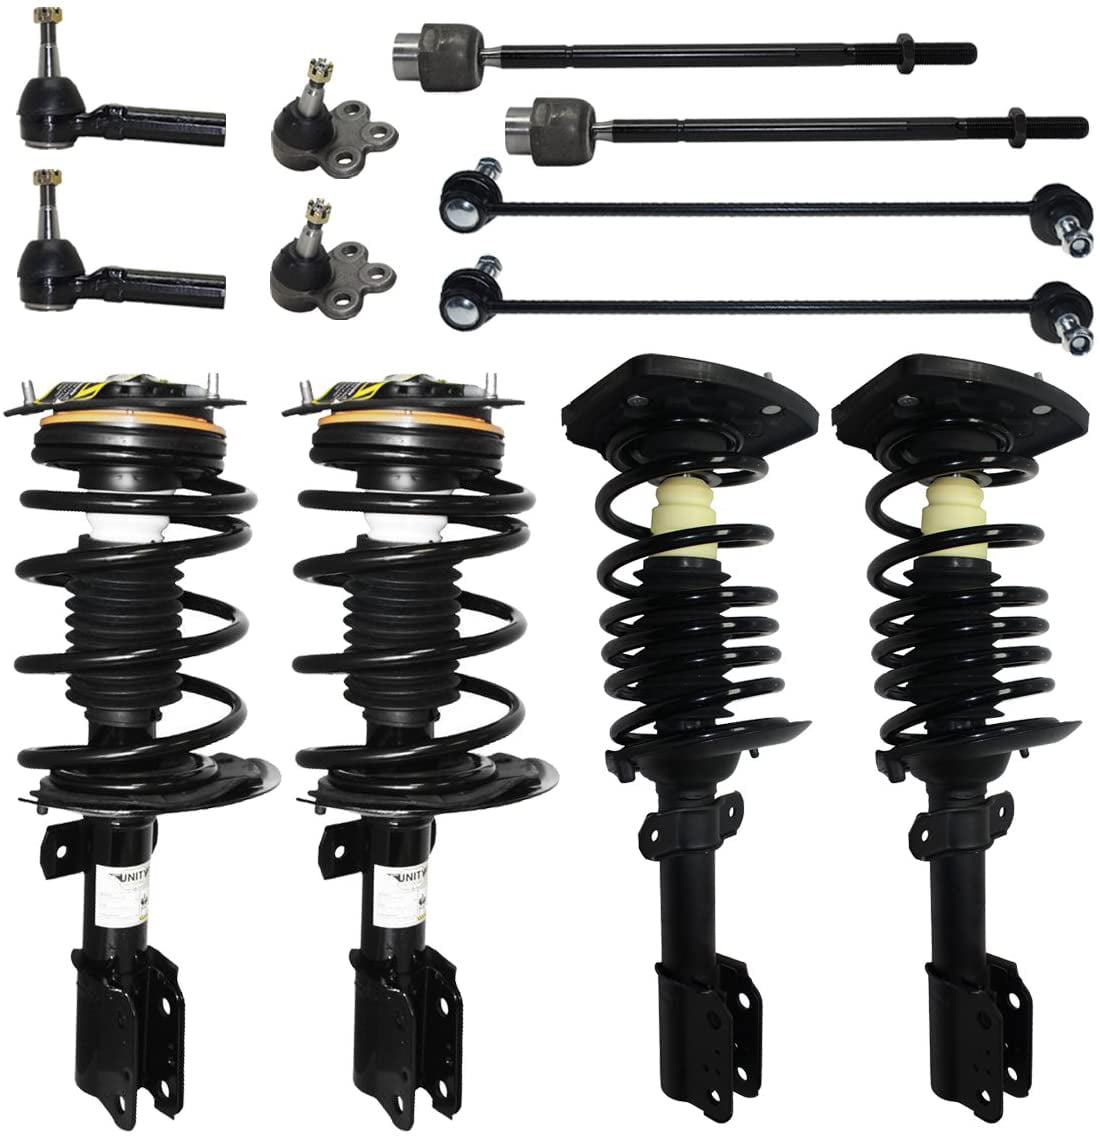 New 12pc Complete Front Quick Install Ready Strut Kit for 16" and 17" Wheels 